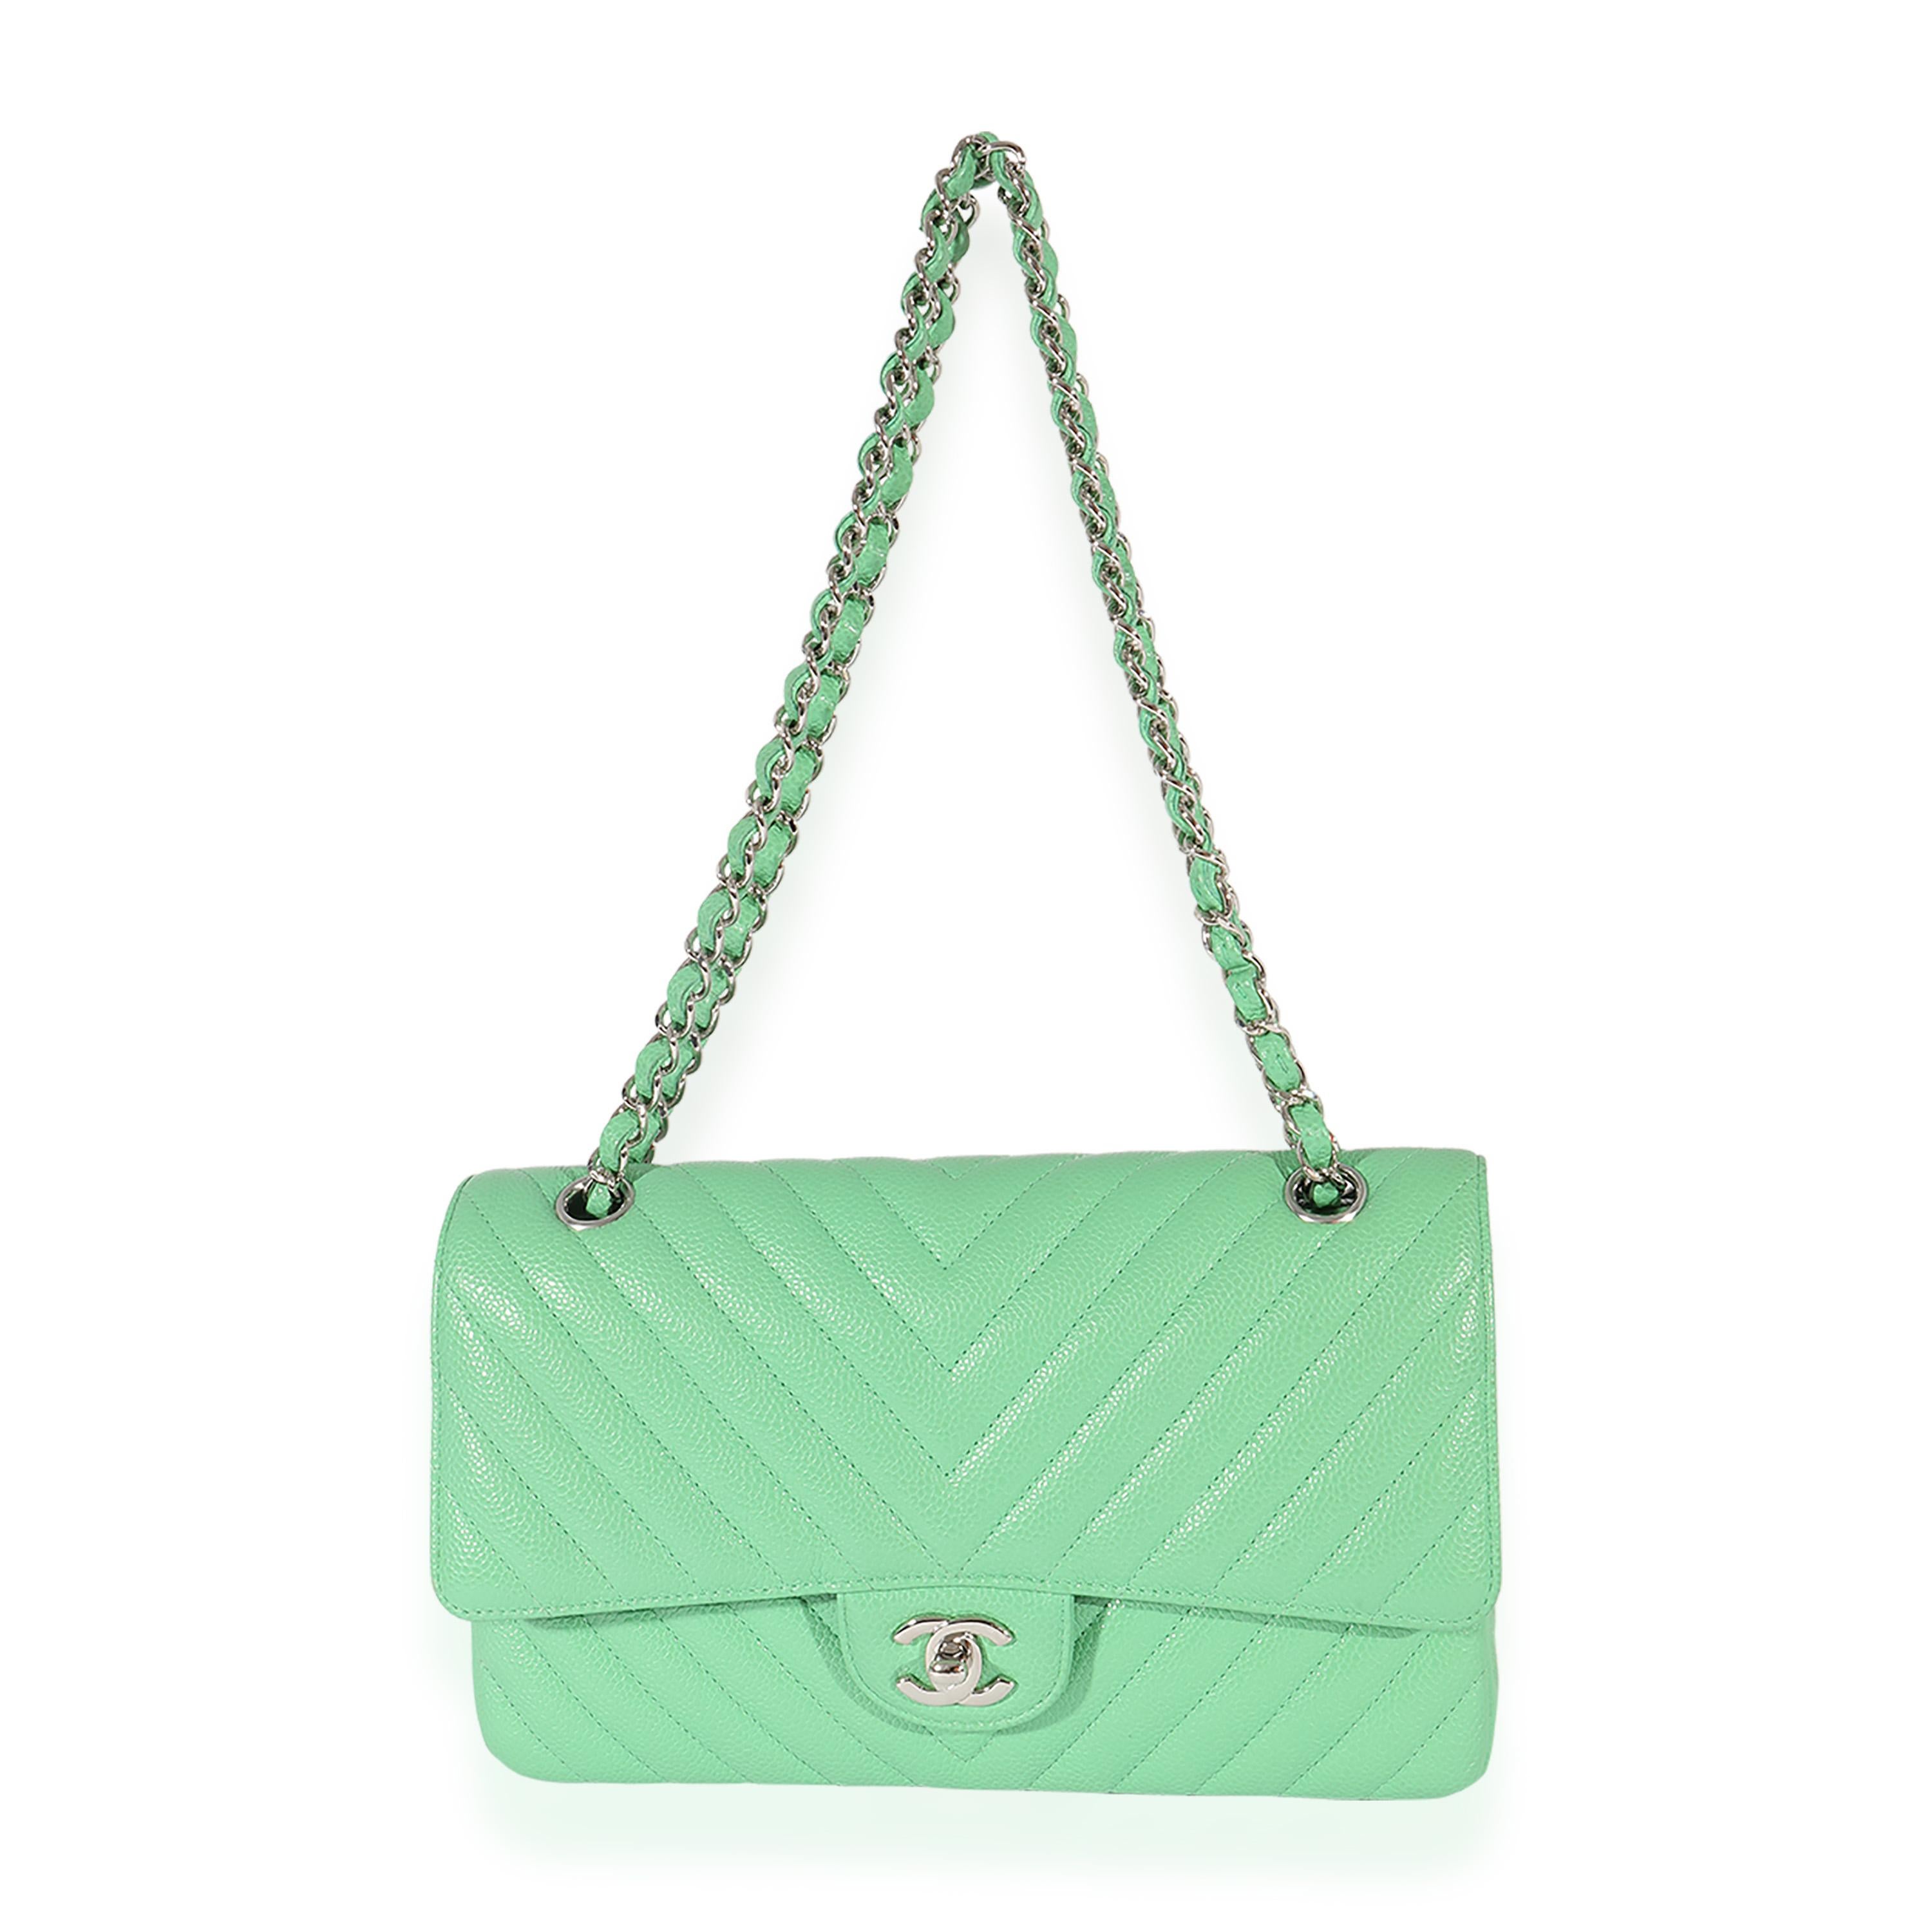 Listing Title: Chanel Green Chevron Quilted Caviar Medium Classic Flap Bag
SKU: 125071
MSRP: 8800.00
Condition: Pre-owned 
Handbag Condition: Very Good
Condition Comments: Very Good condition. Exterior corner scuffing and discoloration throughout.